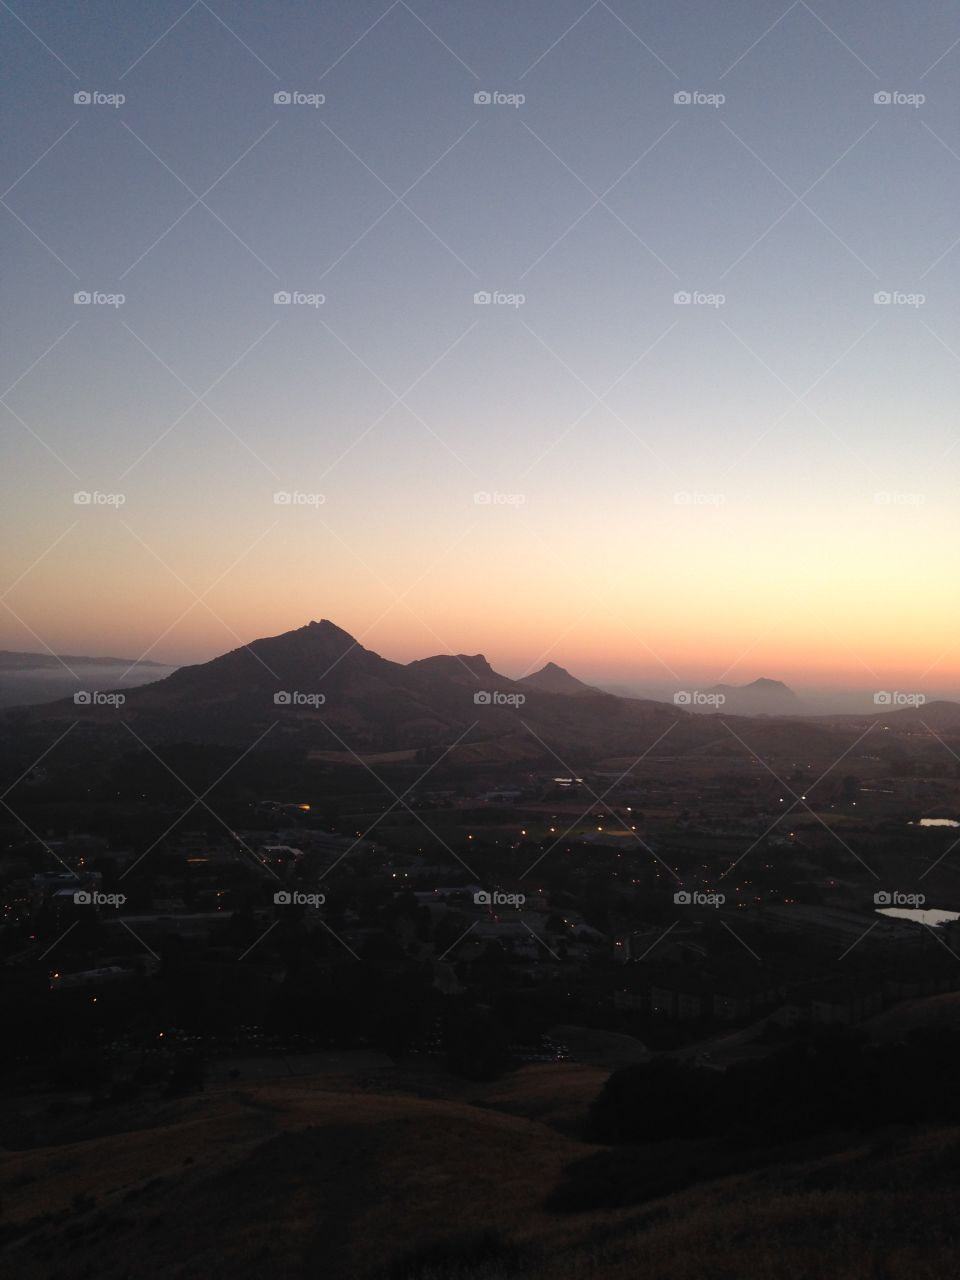 Sunset in San Luis Obispo, CA at Cal Poly